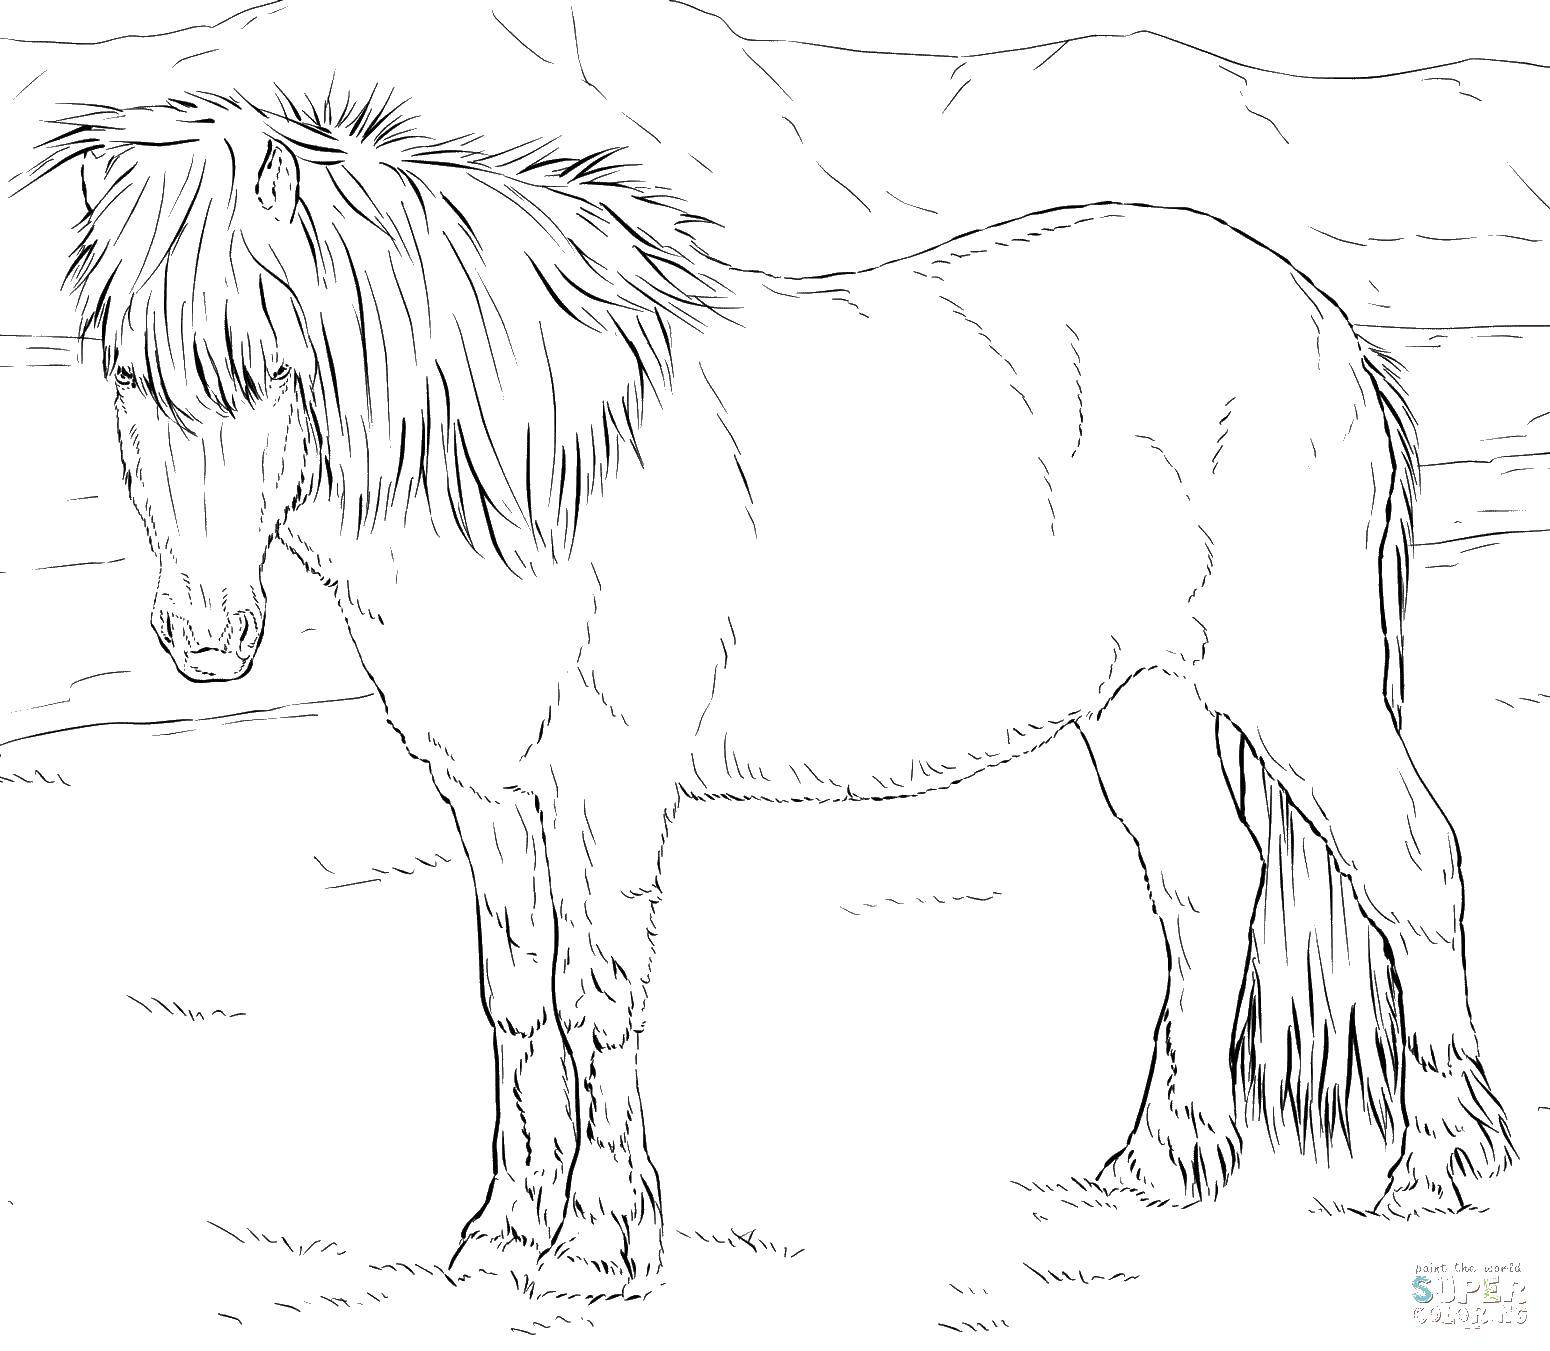 Coloring The horse in the field. Category Animals. Tags:  animals, ponies, horses.